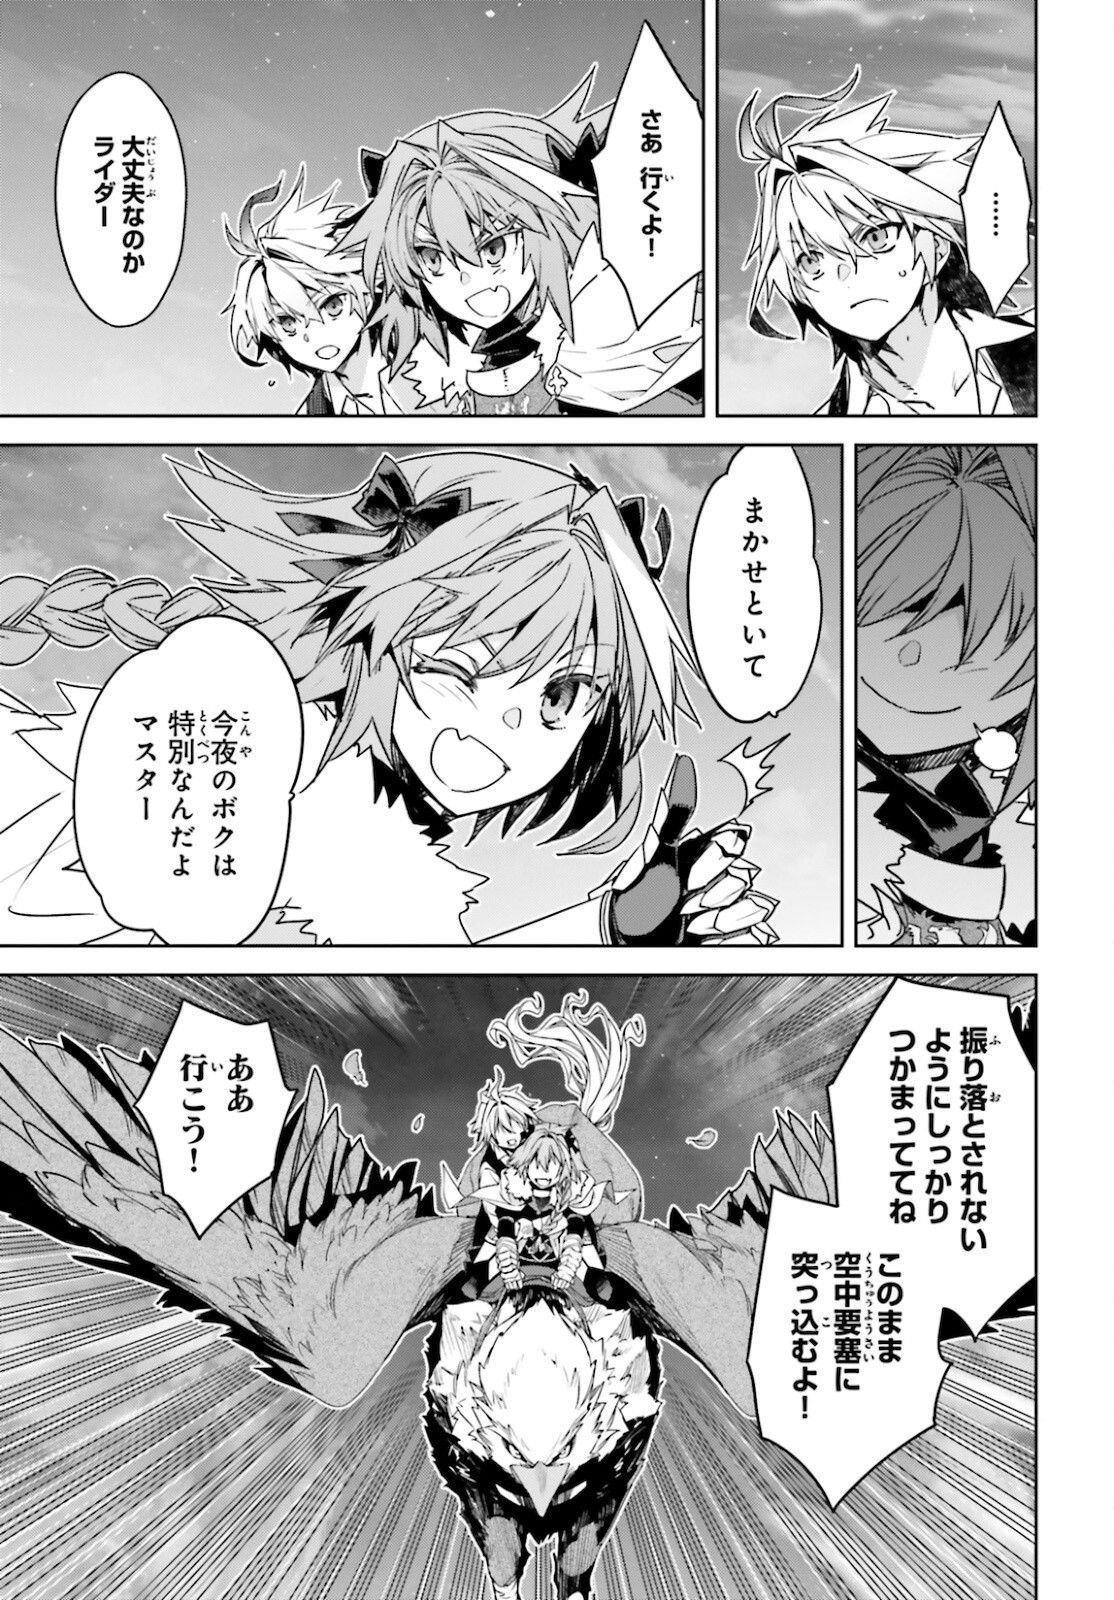 Fate-Apocrypha - Chapter 55-2 - Page 4